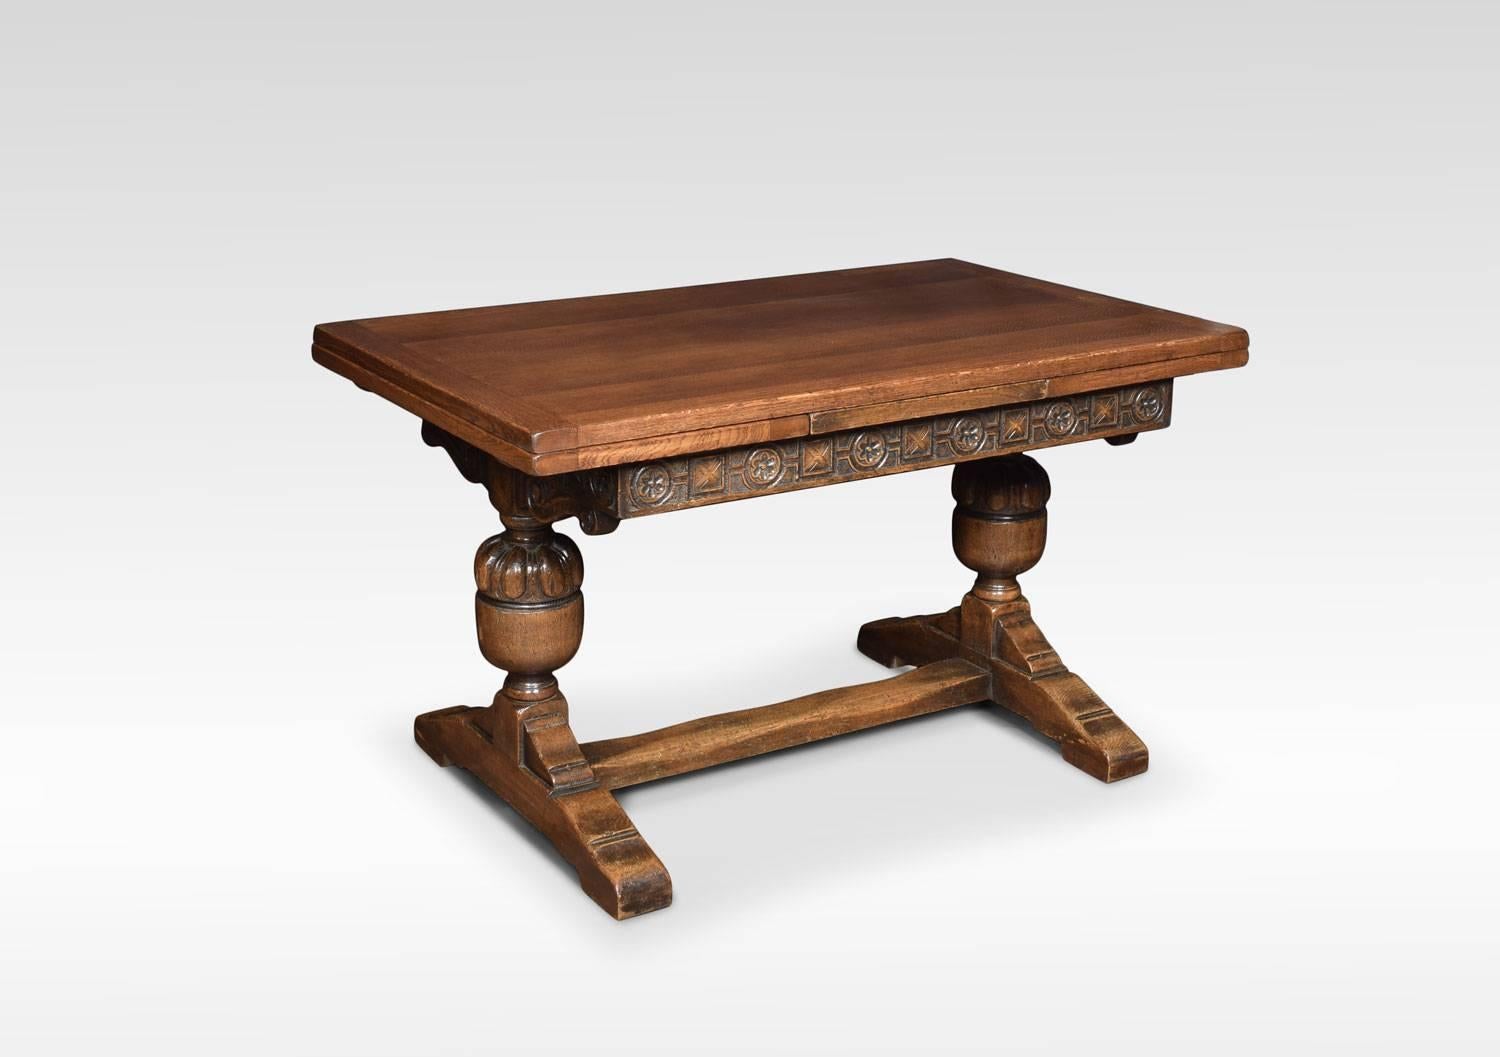 Oak draw leaf refectory table, the rectangular solid oak top above two pull-out ends. To the carved freeze raised on lobed carved bulbous supports united by a stretcher.
Dimensions:
Height 31 inches
Length 54 when extended 90 inches
Width 32